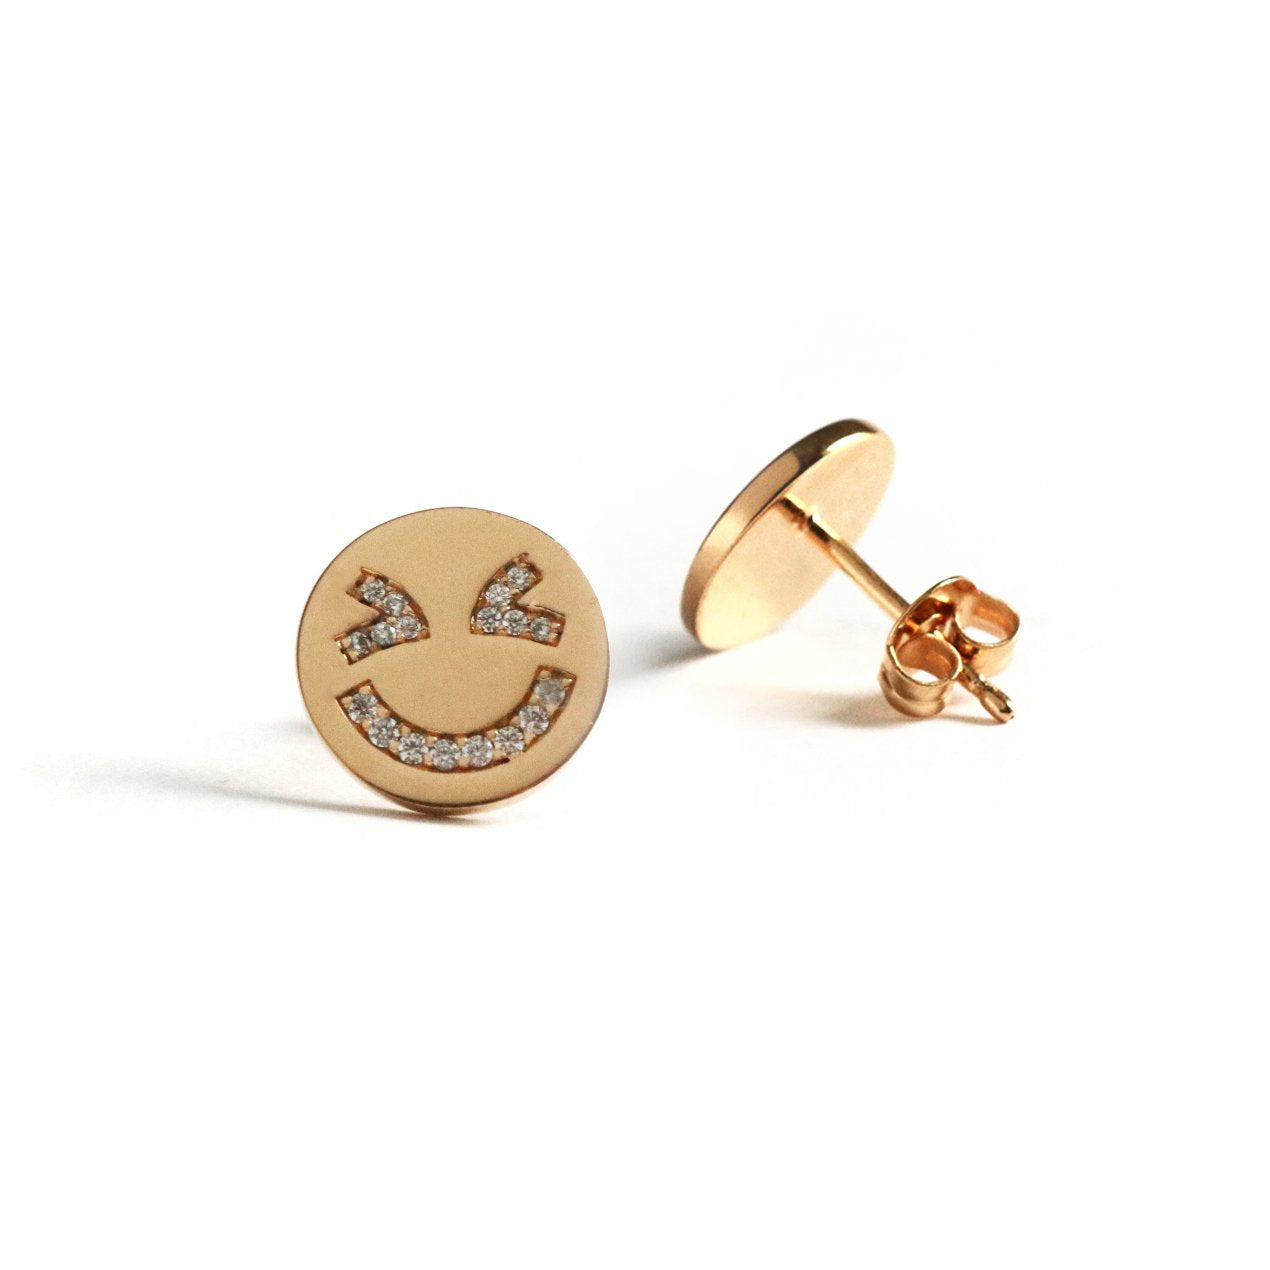 Laughing Face Earrings - Chainless Brain